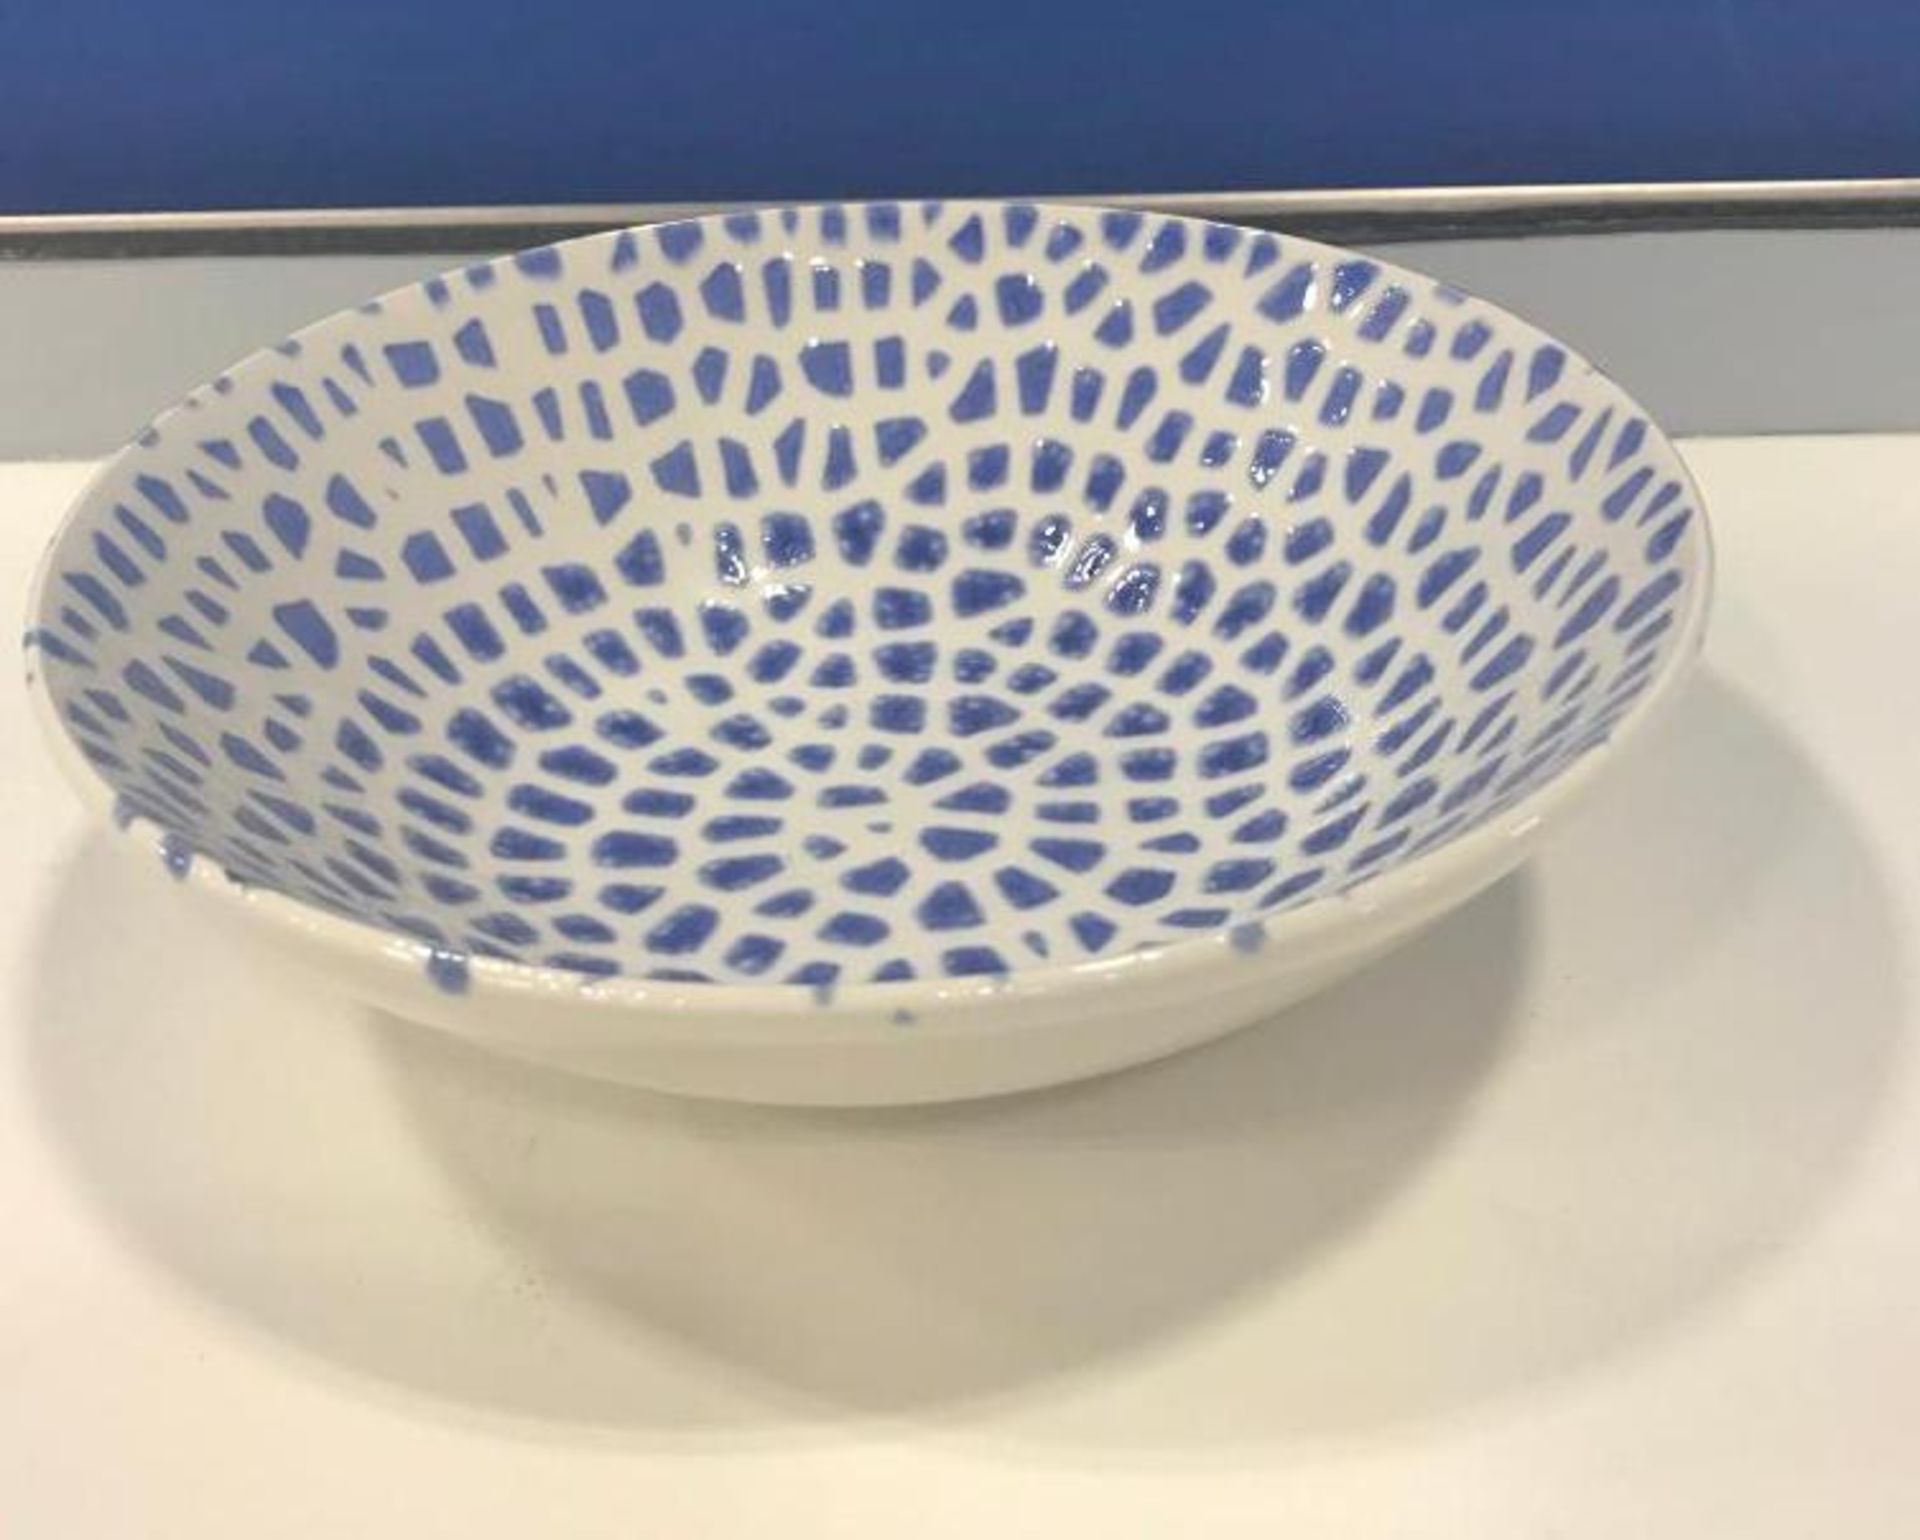 DUDSON MOSAIC BLUE CHEF'S BOWL 8" - 12/CASE, MADE IN ENGLAND - Image 4 of 5